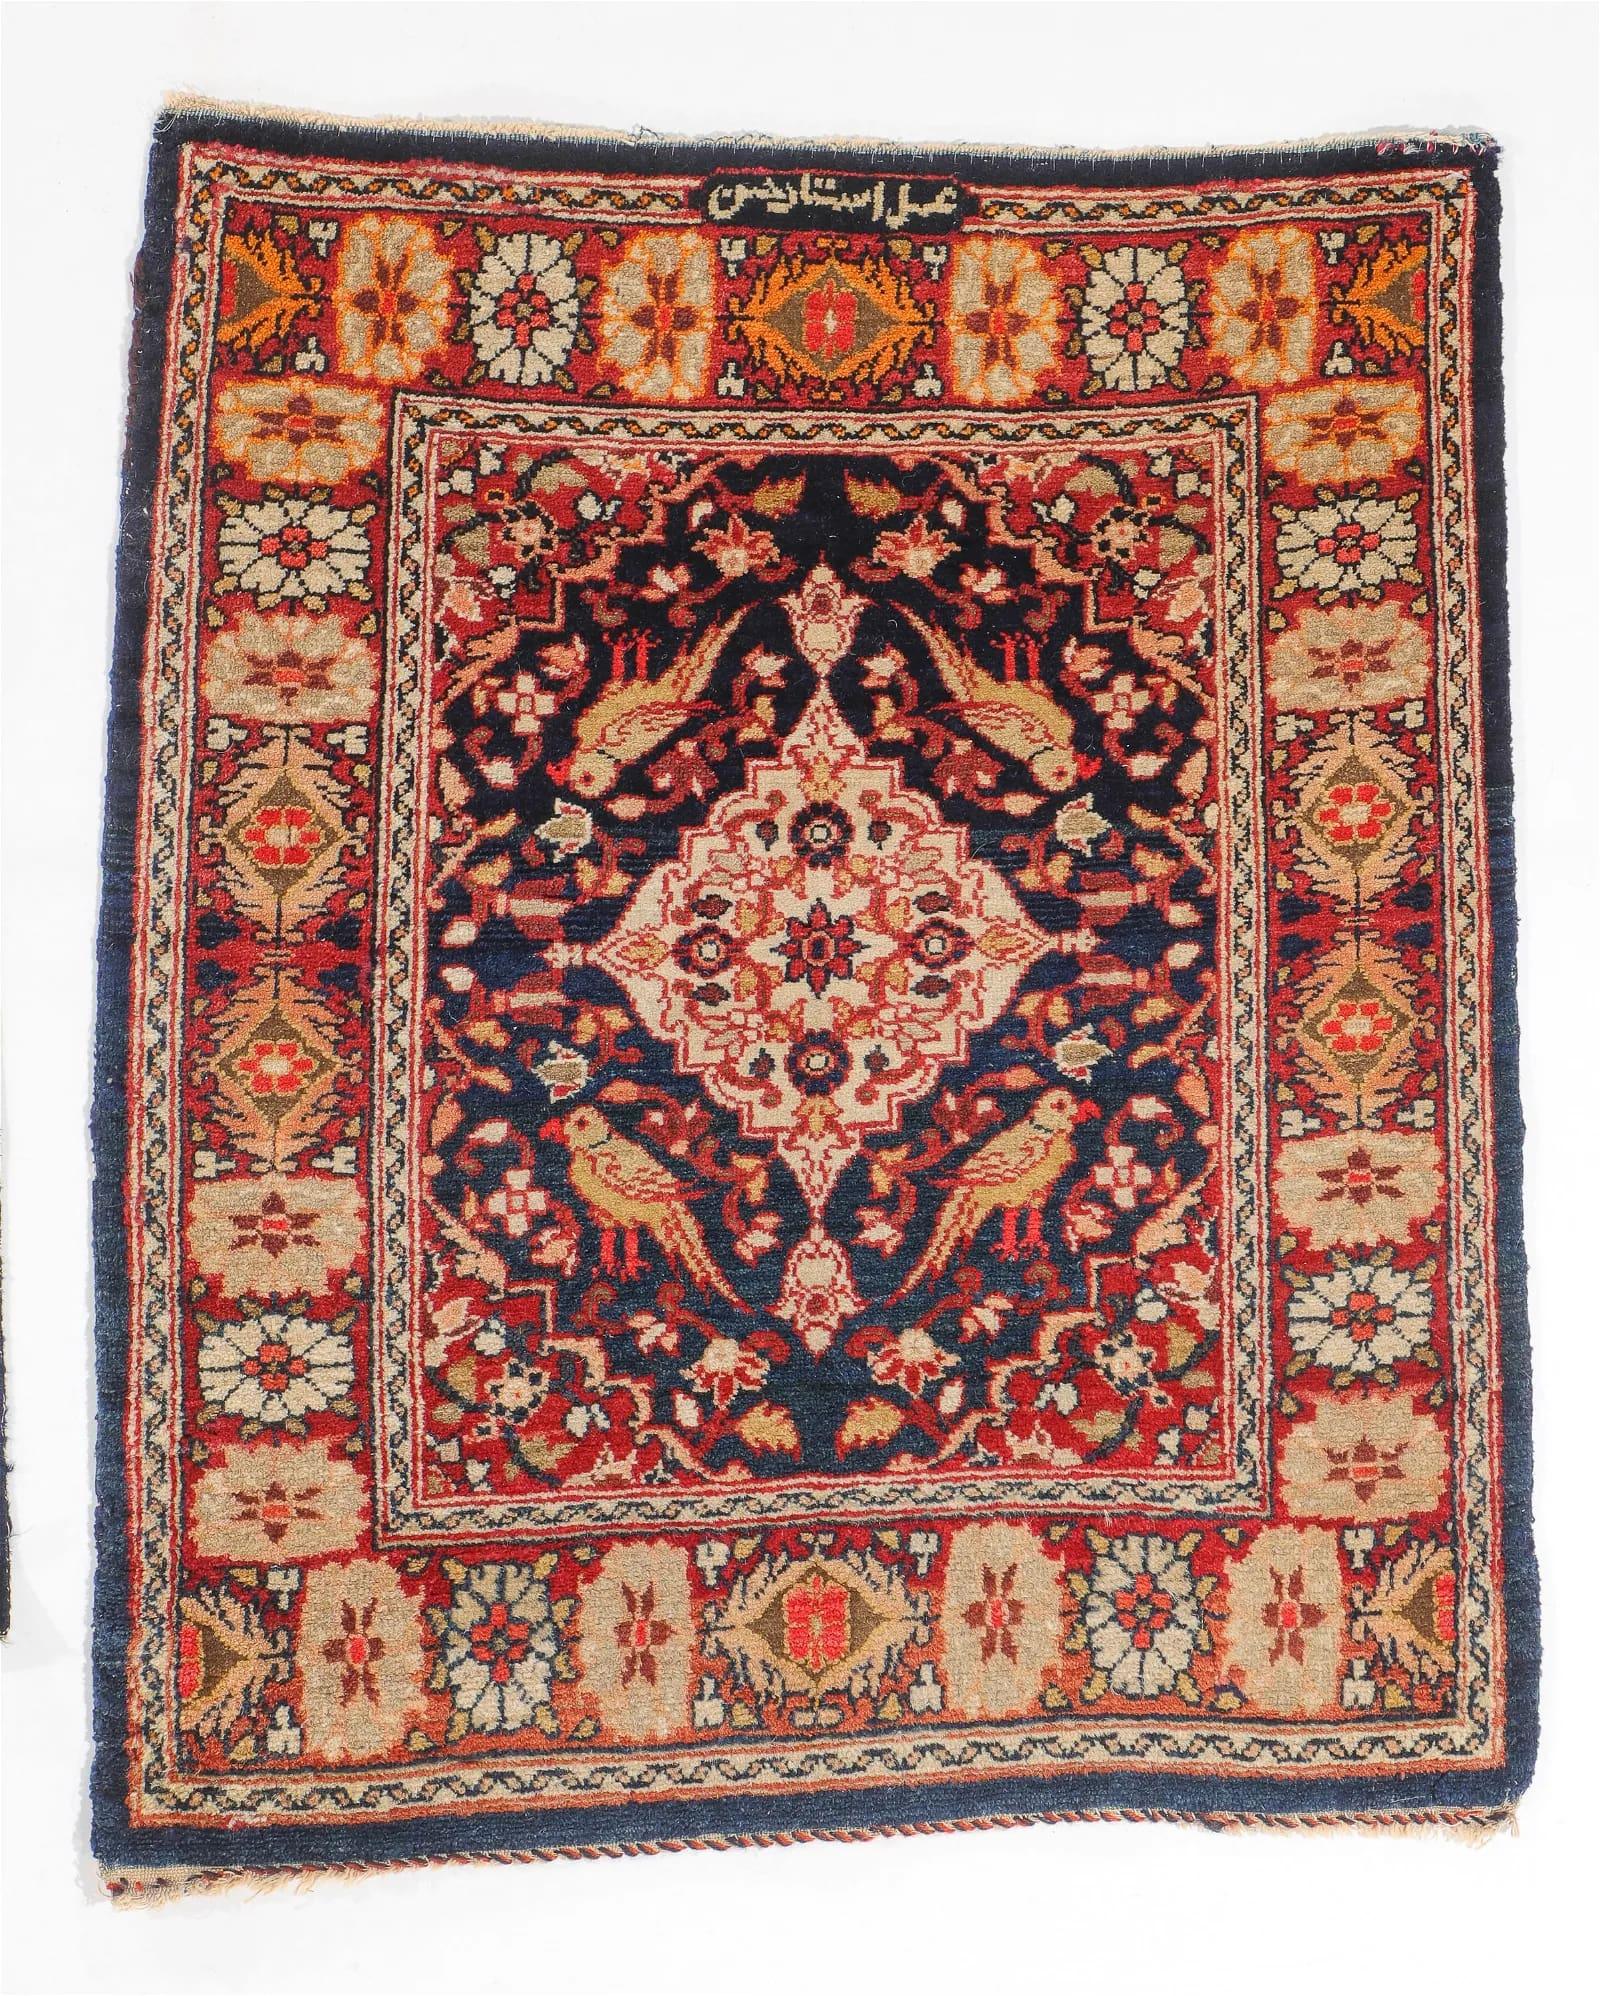 Lot of 2 Antique Persian Sarouk and Yazd Rugs 2' x 2.5', 1900s - 2B32 In Good Condition For Sale In Bordeaux, FR